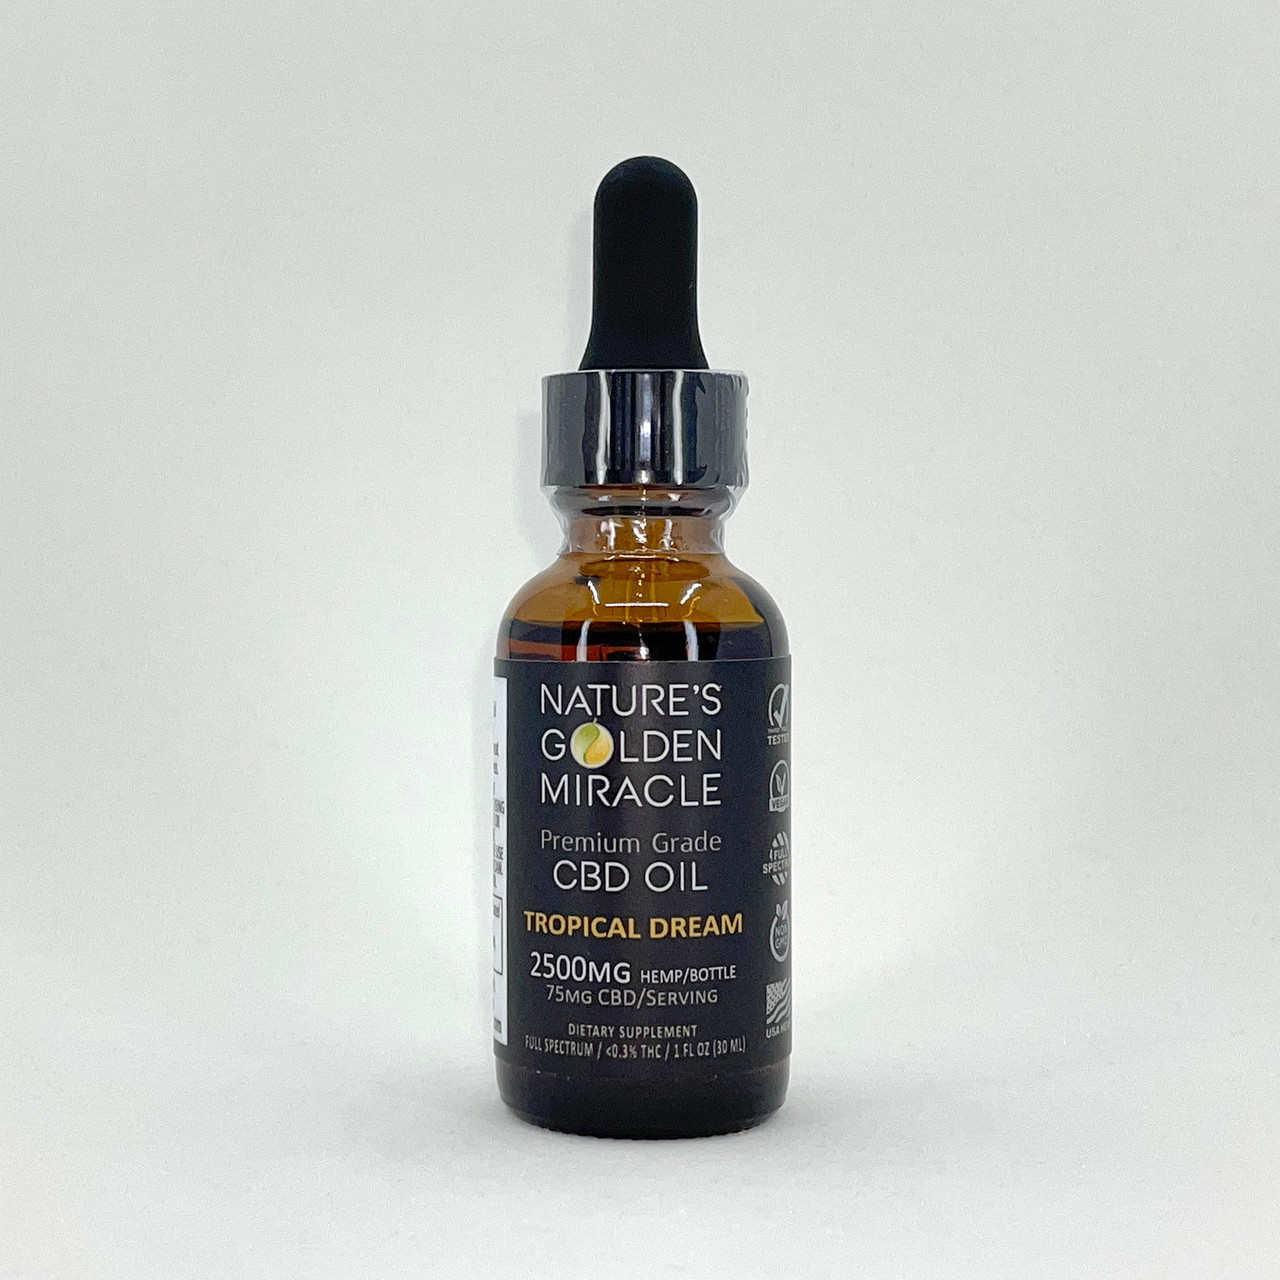 2500mg Tropical Dream CBD - Nature’s Golden Miracle - Organic ingredients - Premium Grade - Full Spectrum with less than 0.3% THC